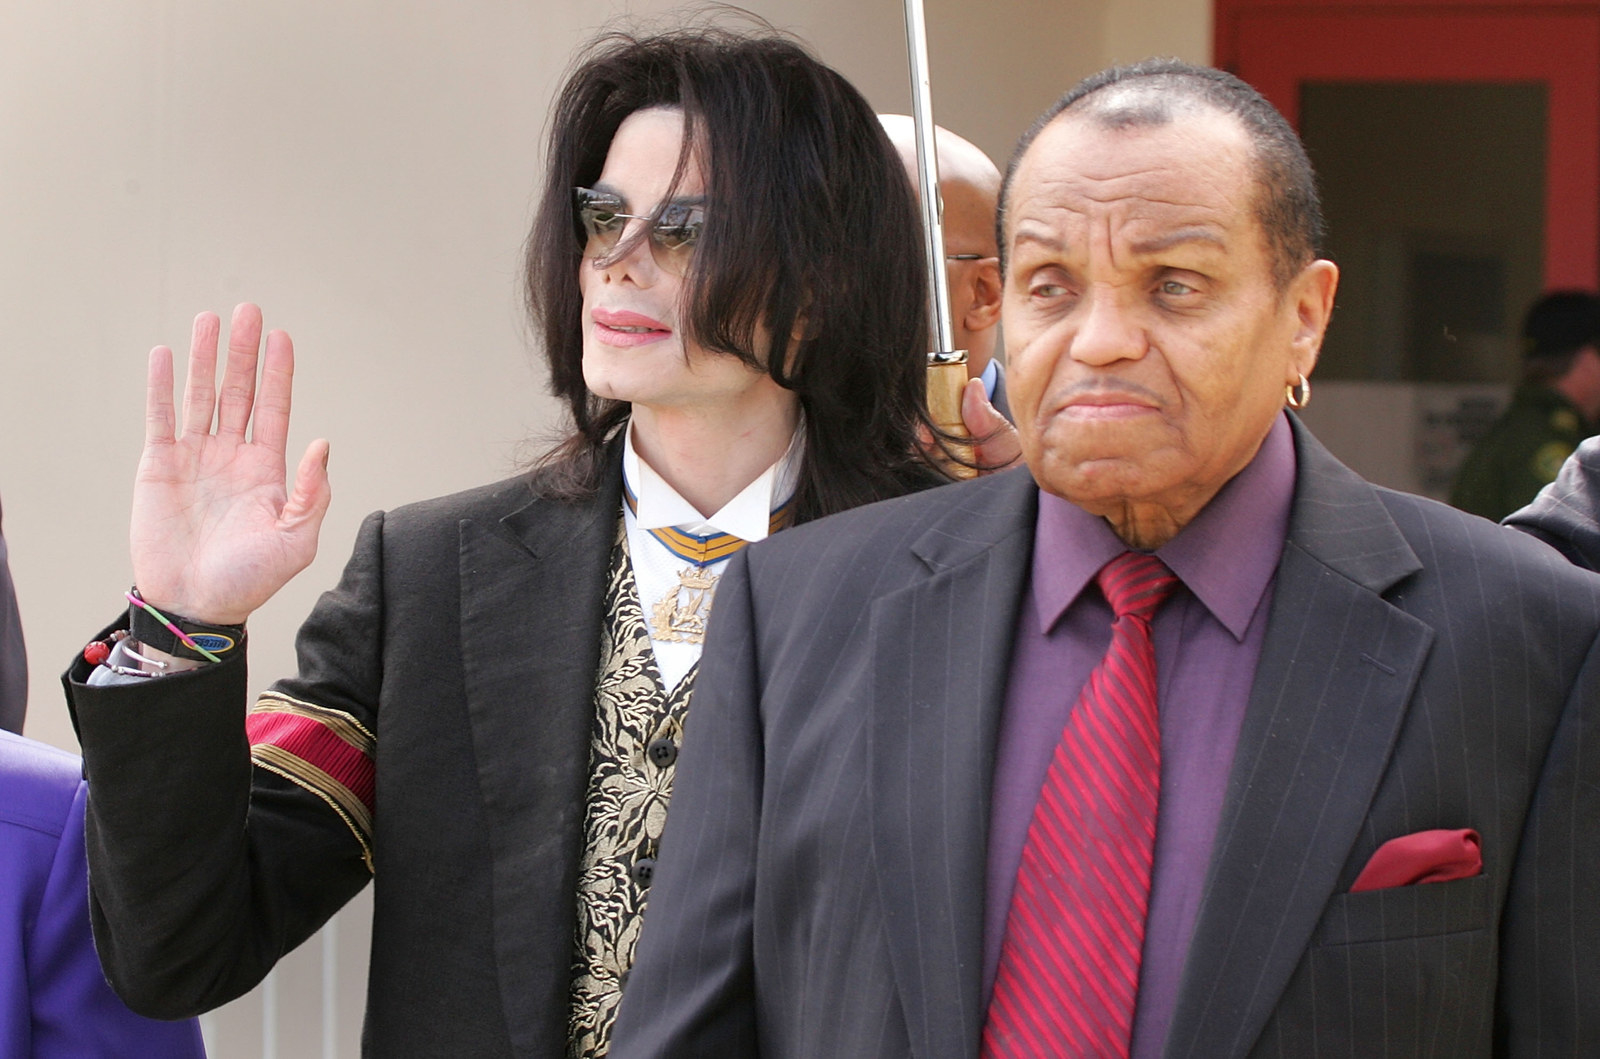 Joe Jackson Has Died. Here's A Look At His Life In Pictures